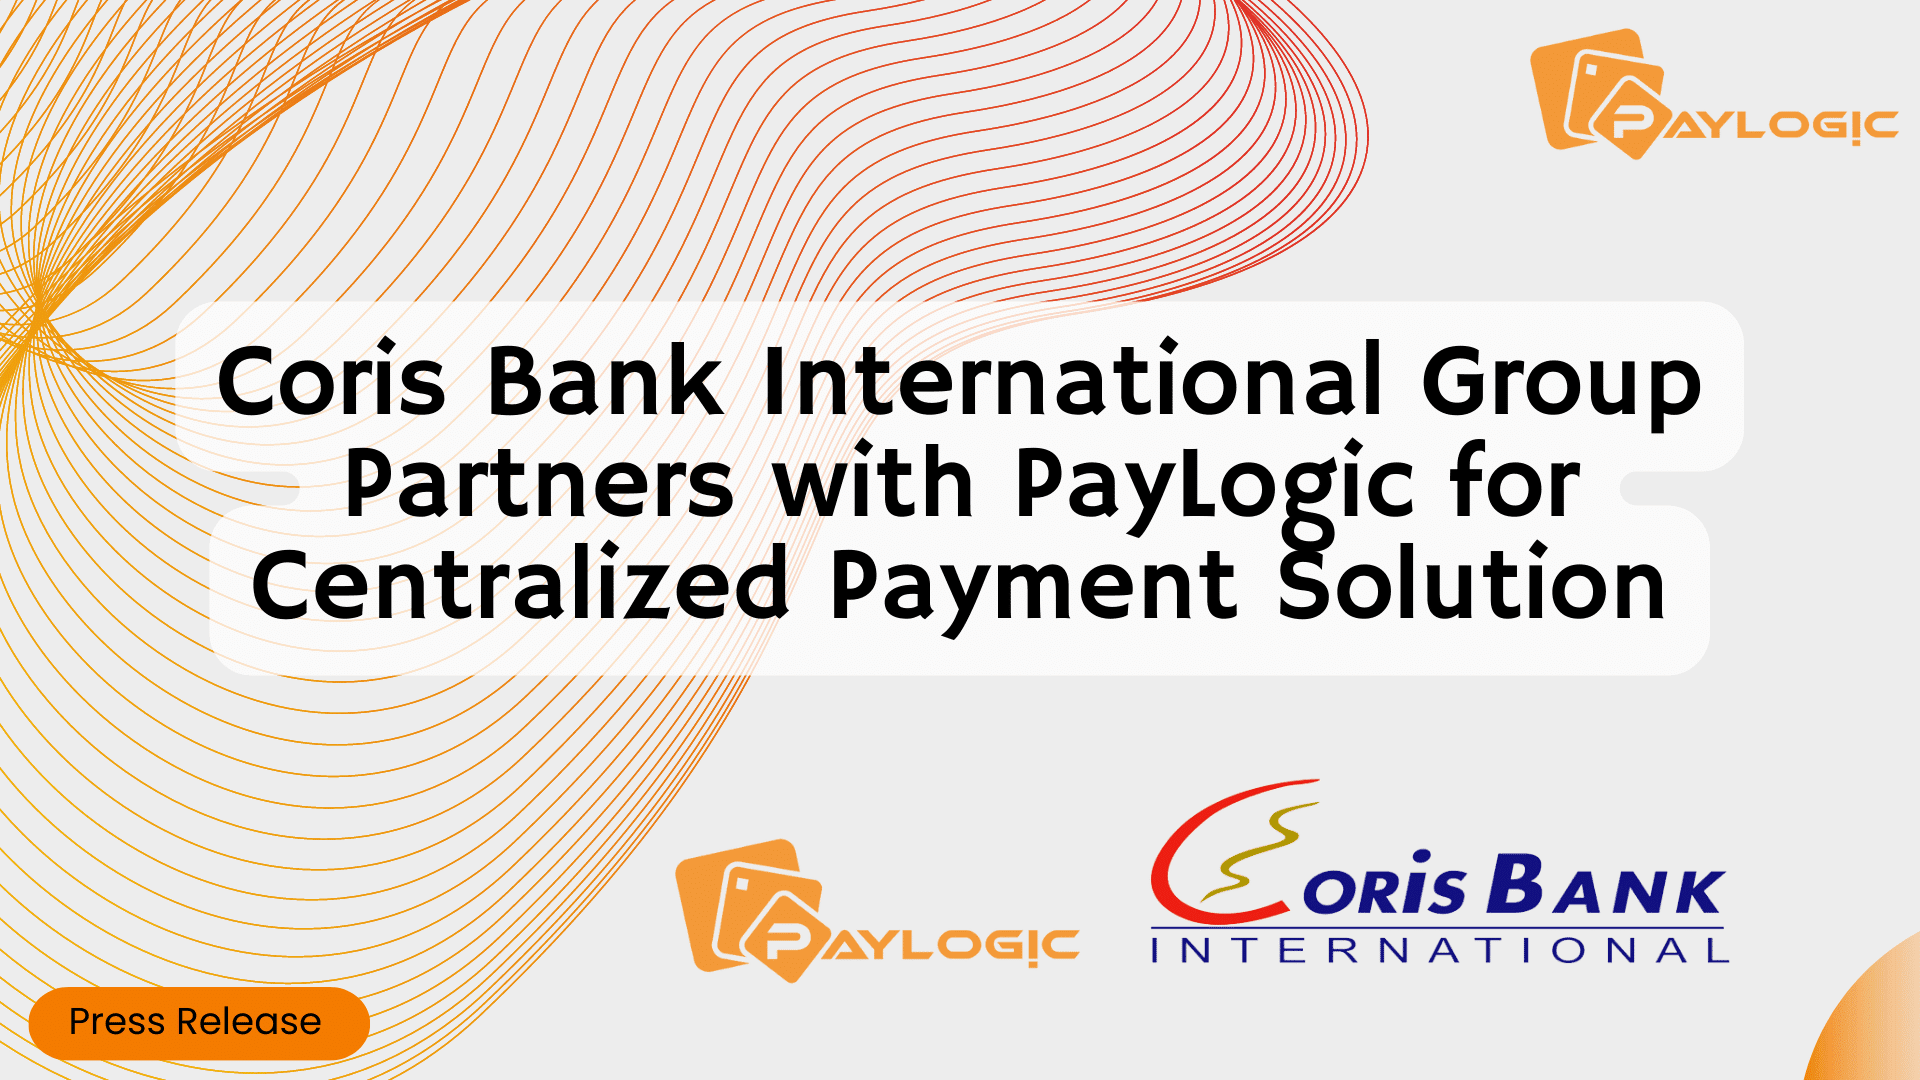 Coris Bank International Group Partners with PayLogic for Centralized Payment Solution